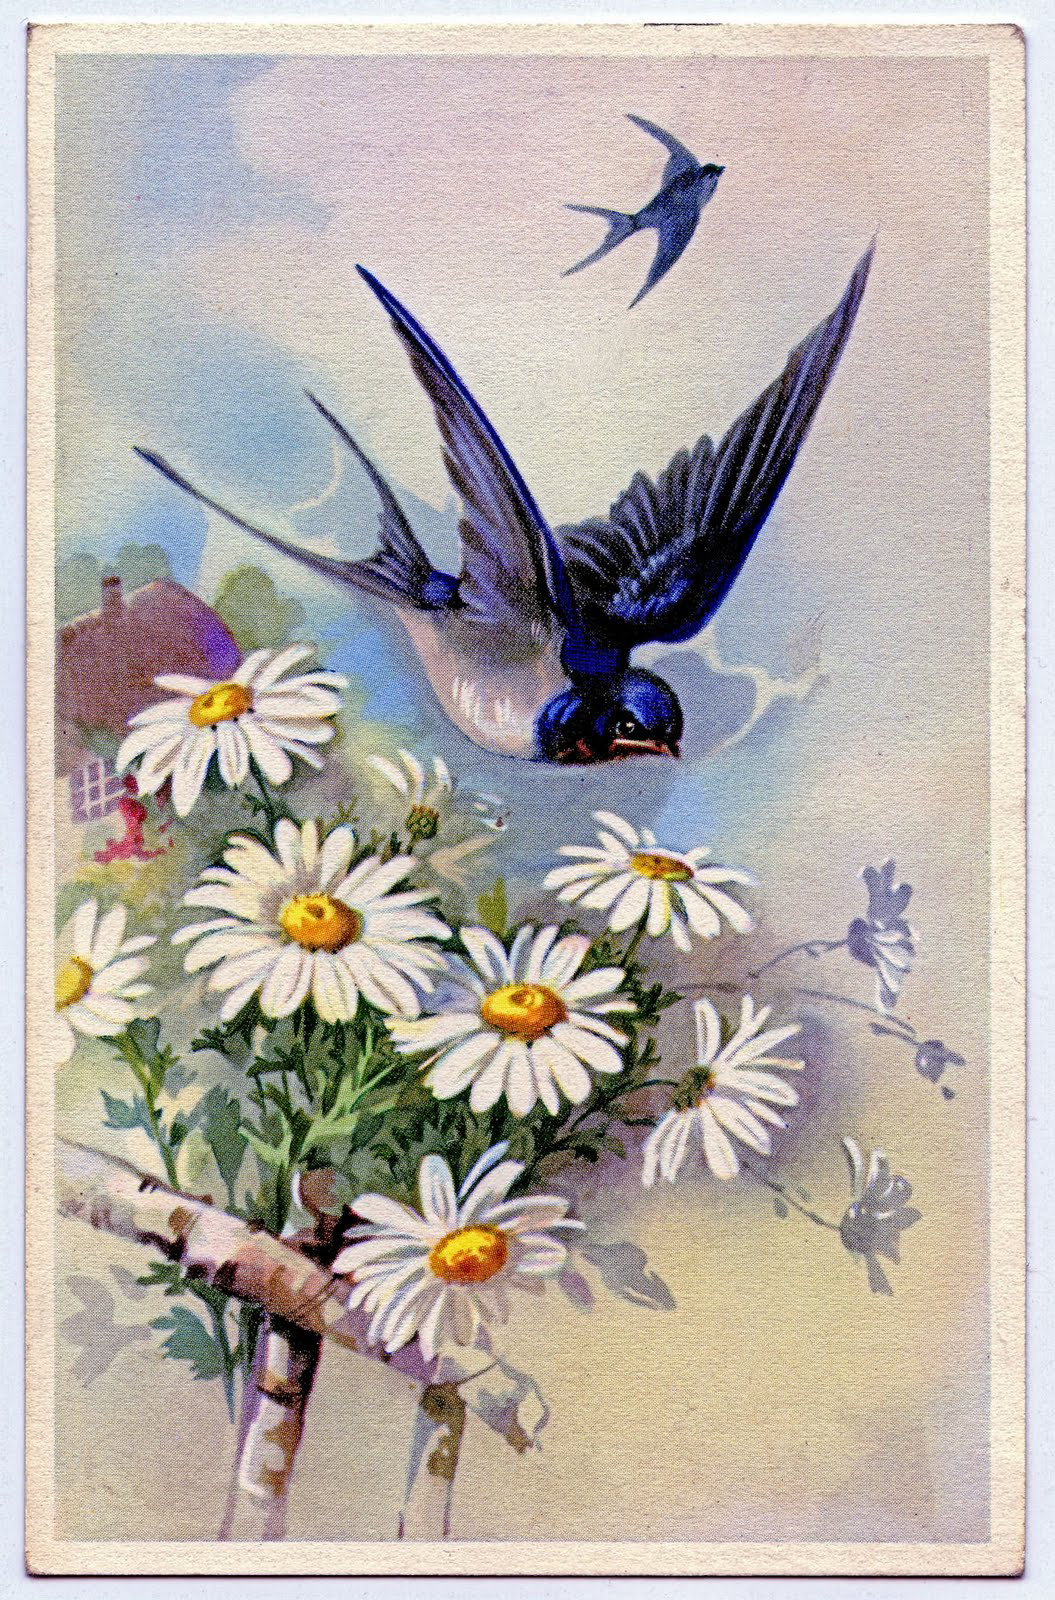 A painting of a flower with a bird